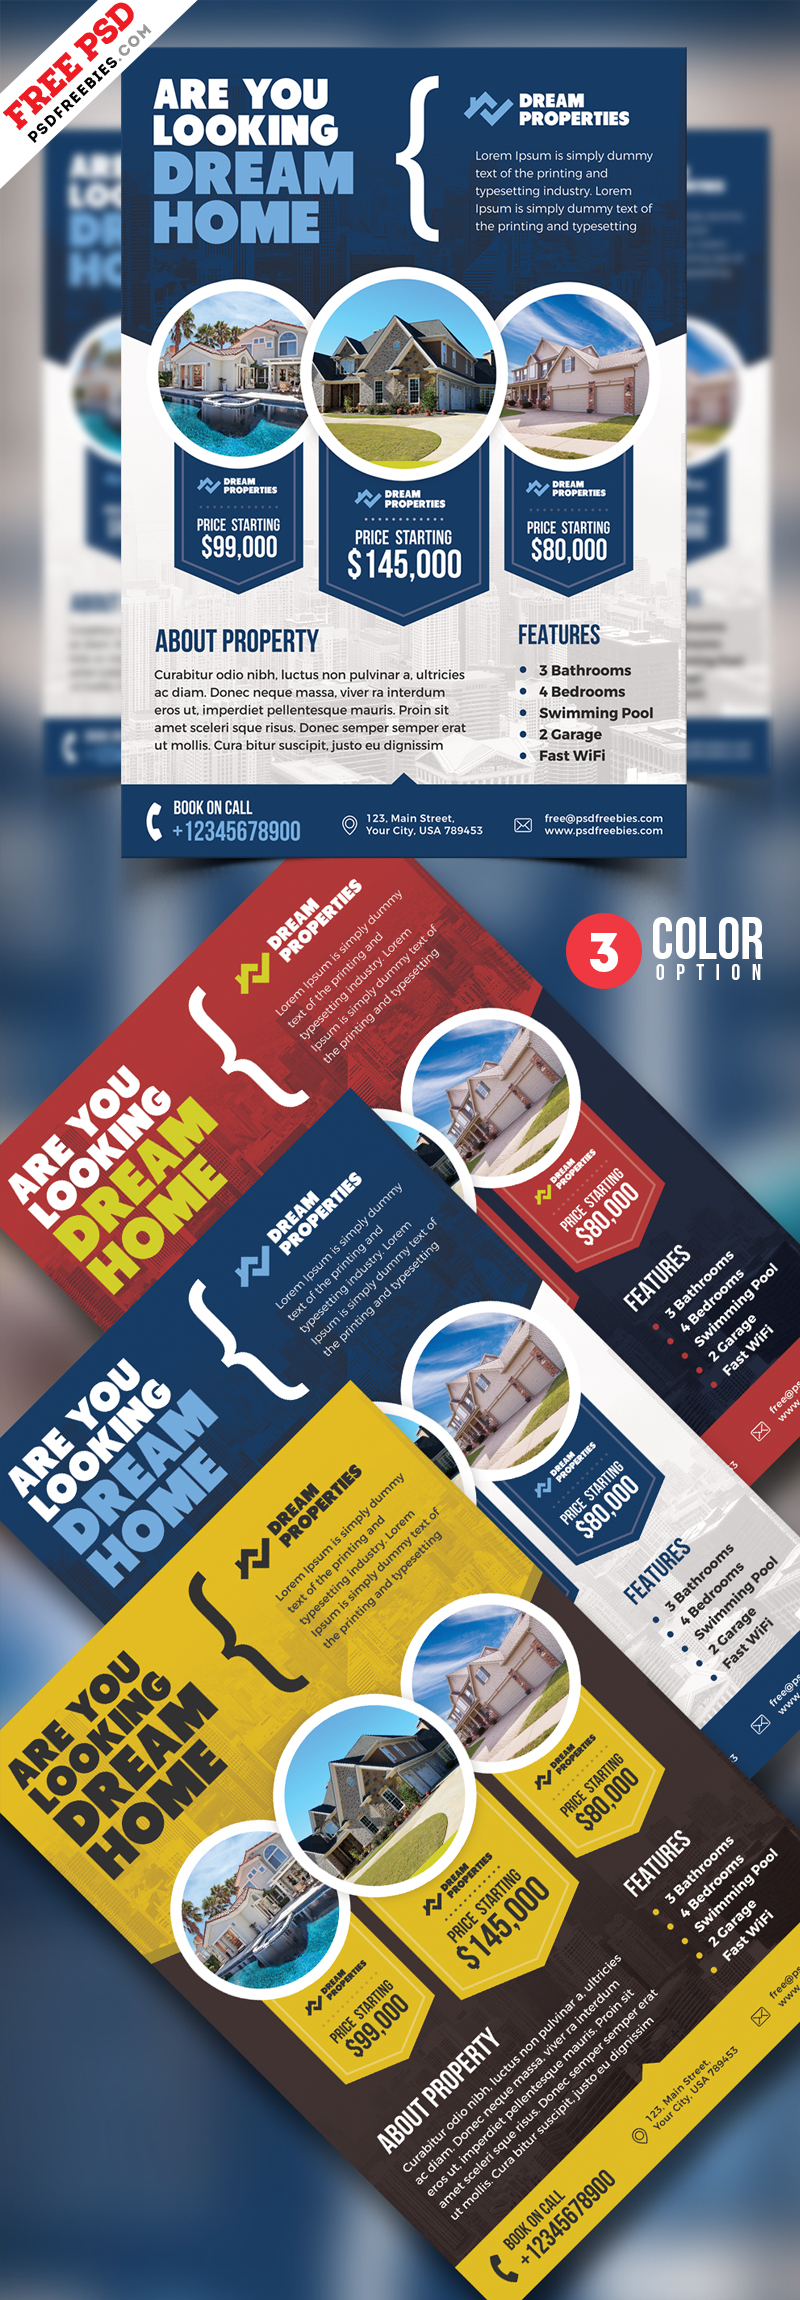 Real Estate Flyer Templates PSD